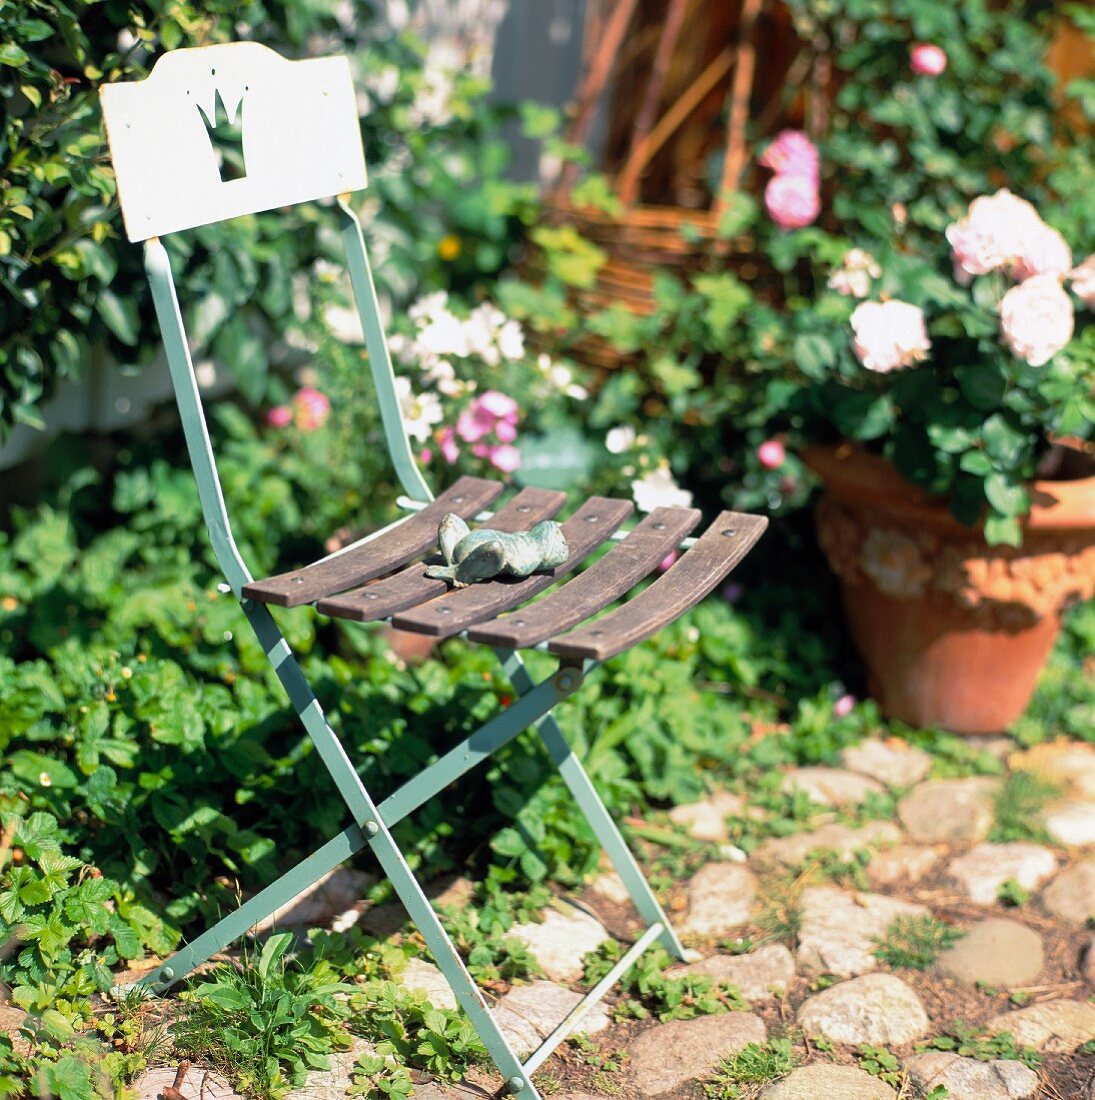 Old garden chair with frog figurine